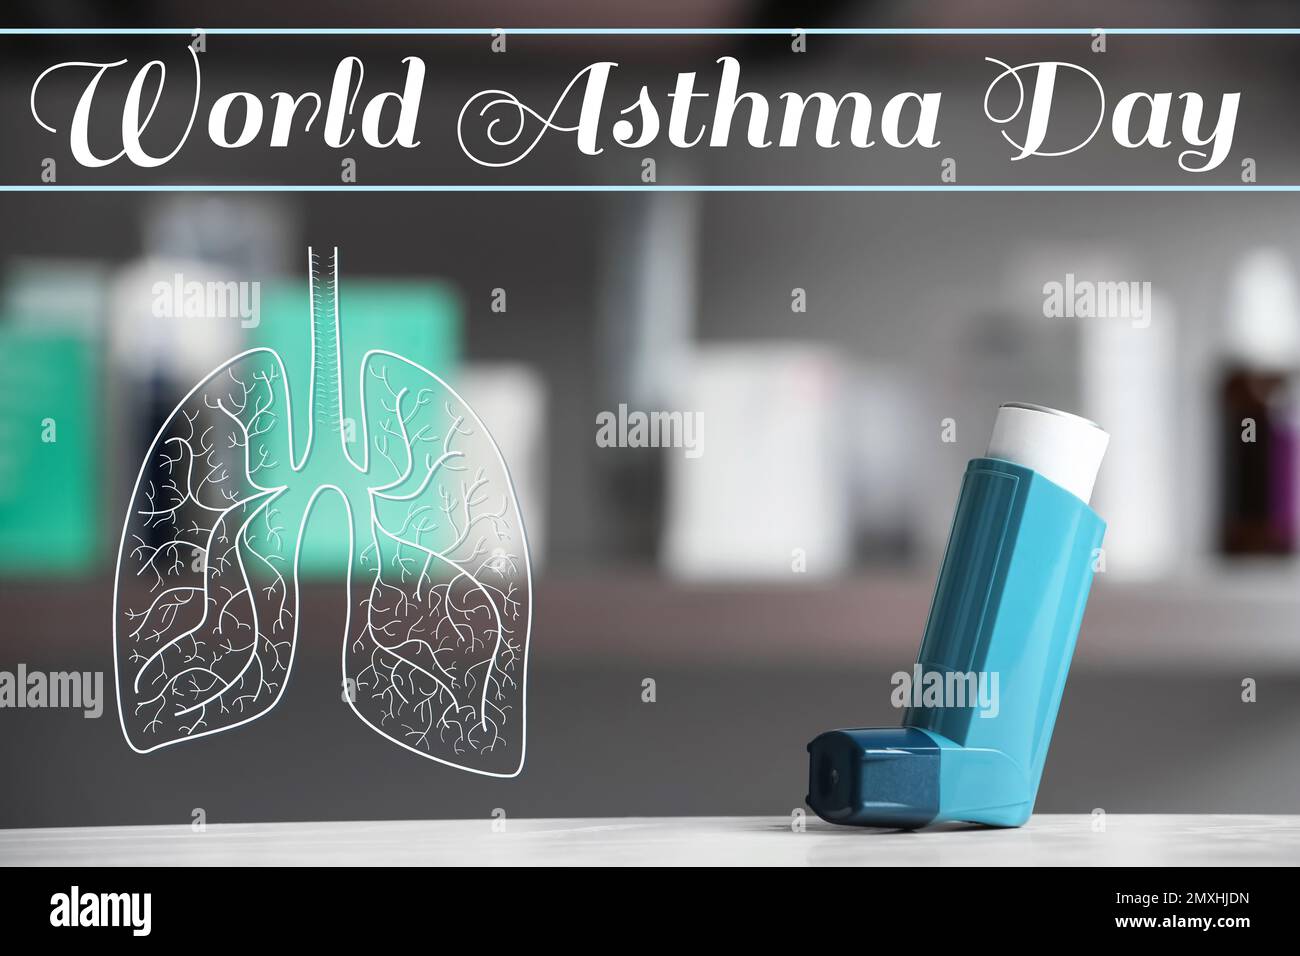 World asthma day. Inhaler on table against blurred background Stock Photo